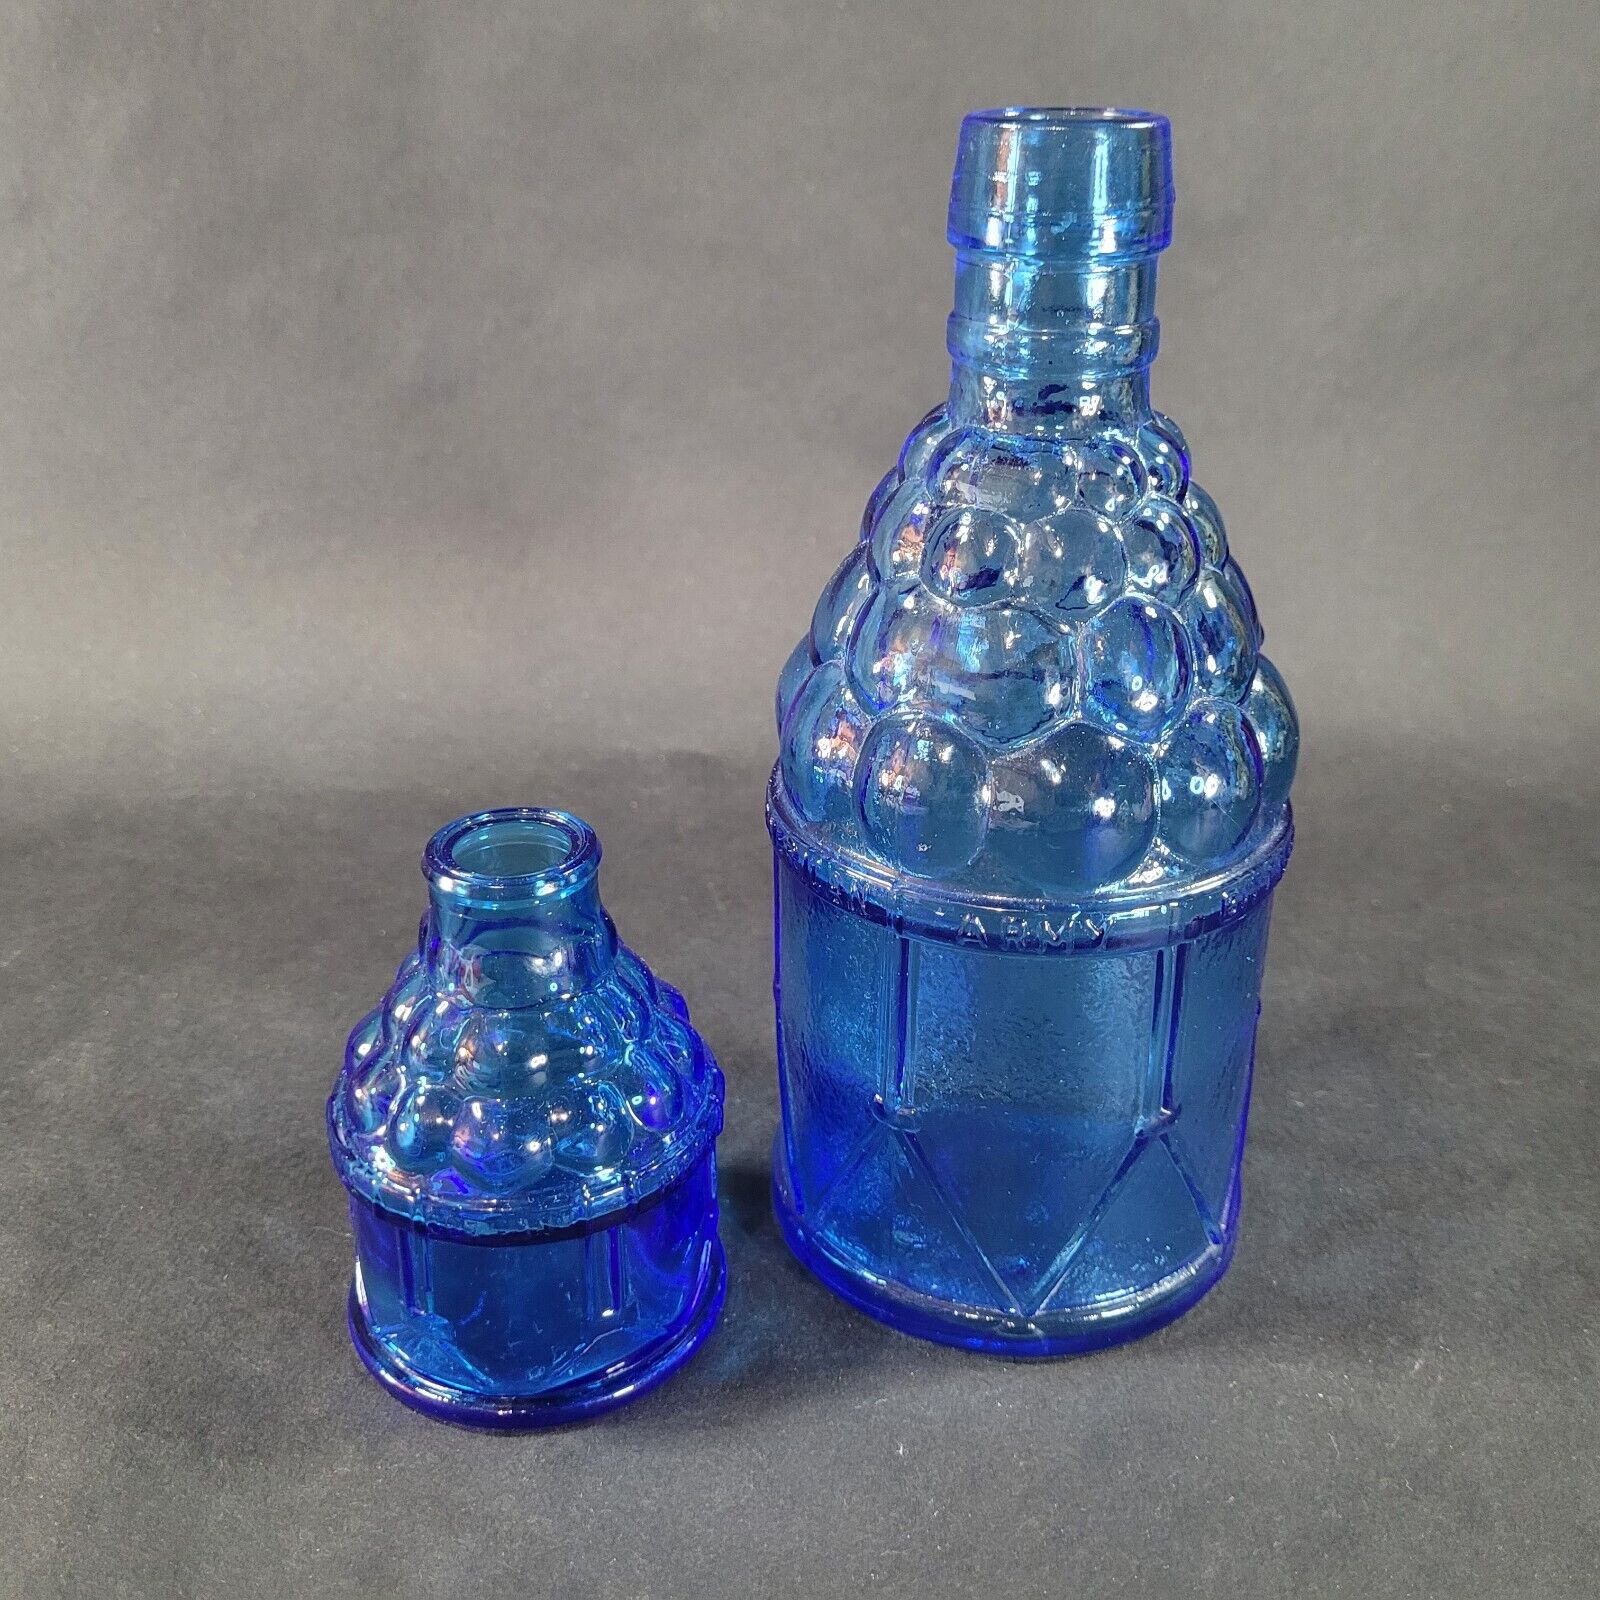 Vintage Blue Glass McGIVERS American Army BITTERS Bottle Riffle Co Herbs Set